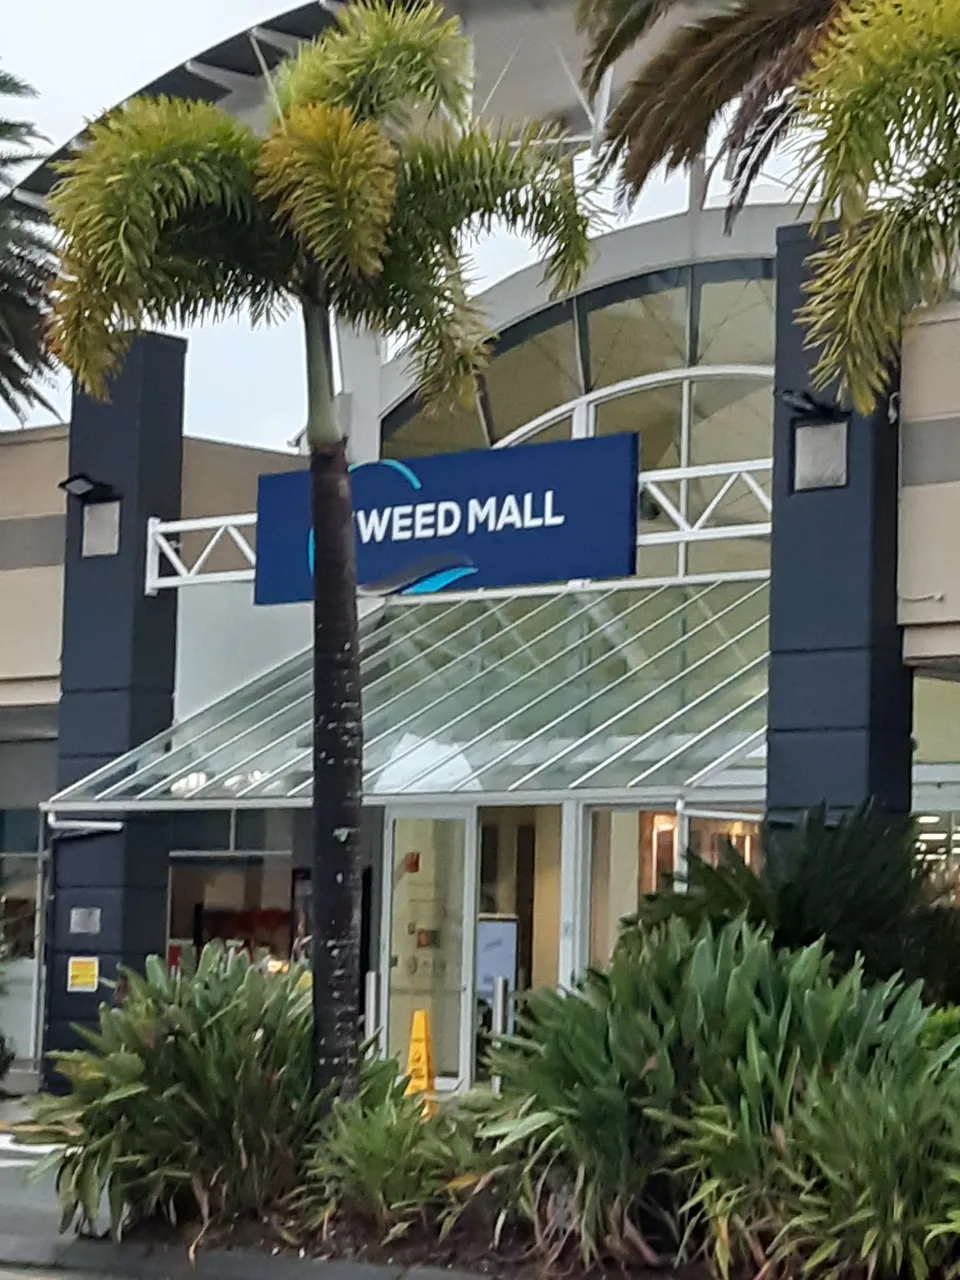 Tweed Heads, NSW. Almost every sign for Tweed heads has had the T removed, leaving only 'Weed Heads'. haha. So Welcome to the weed mall!